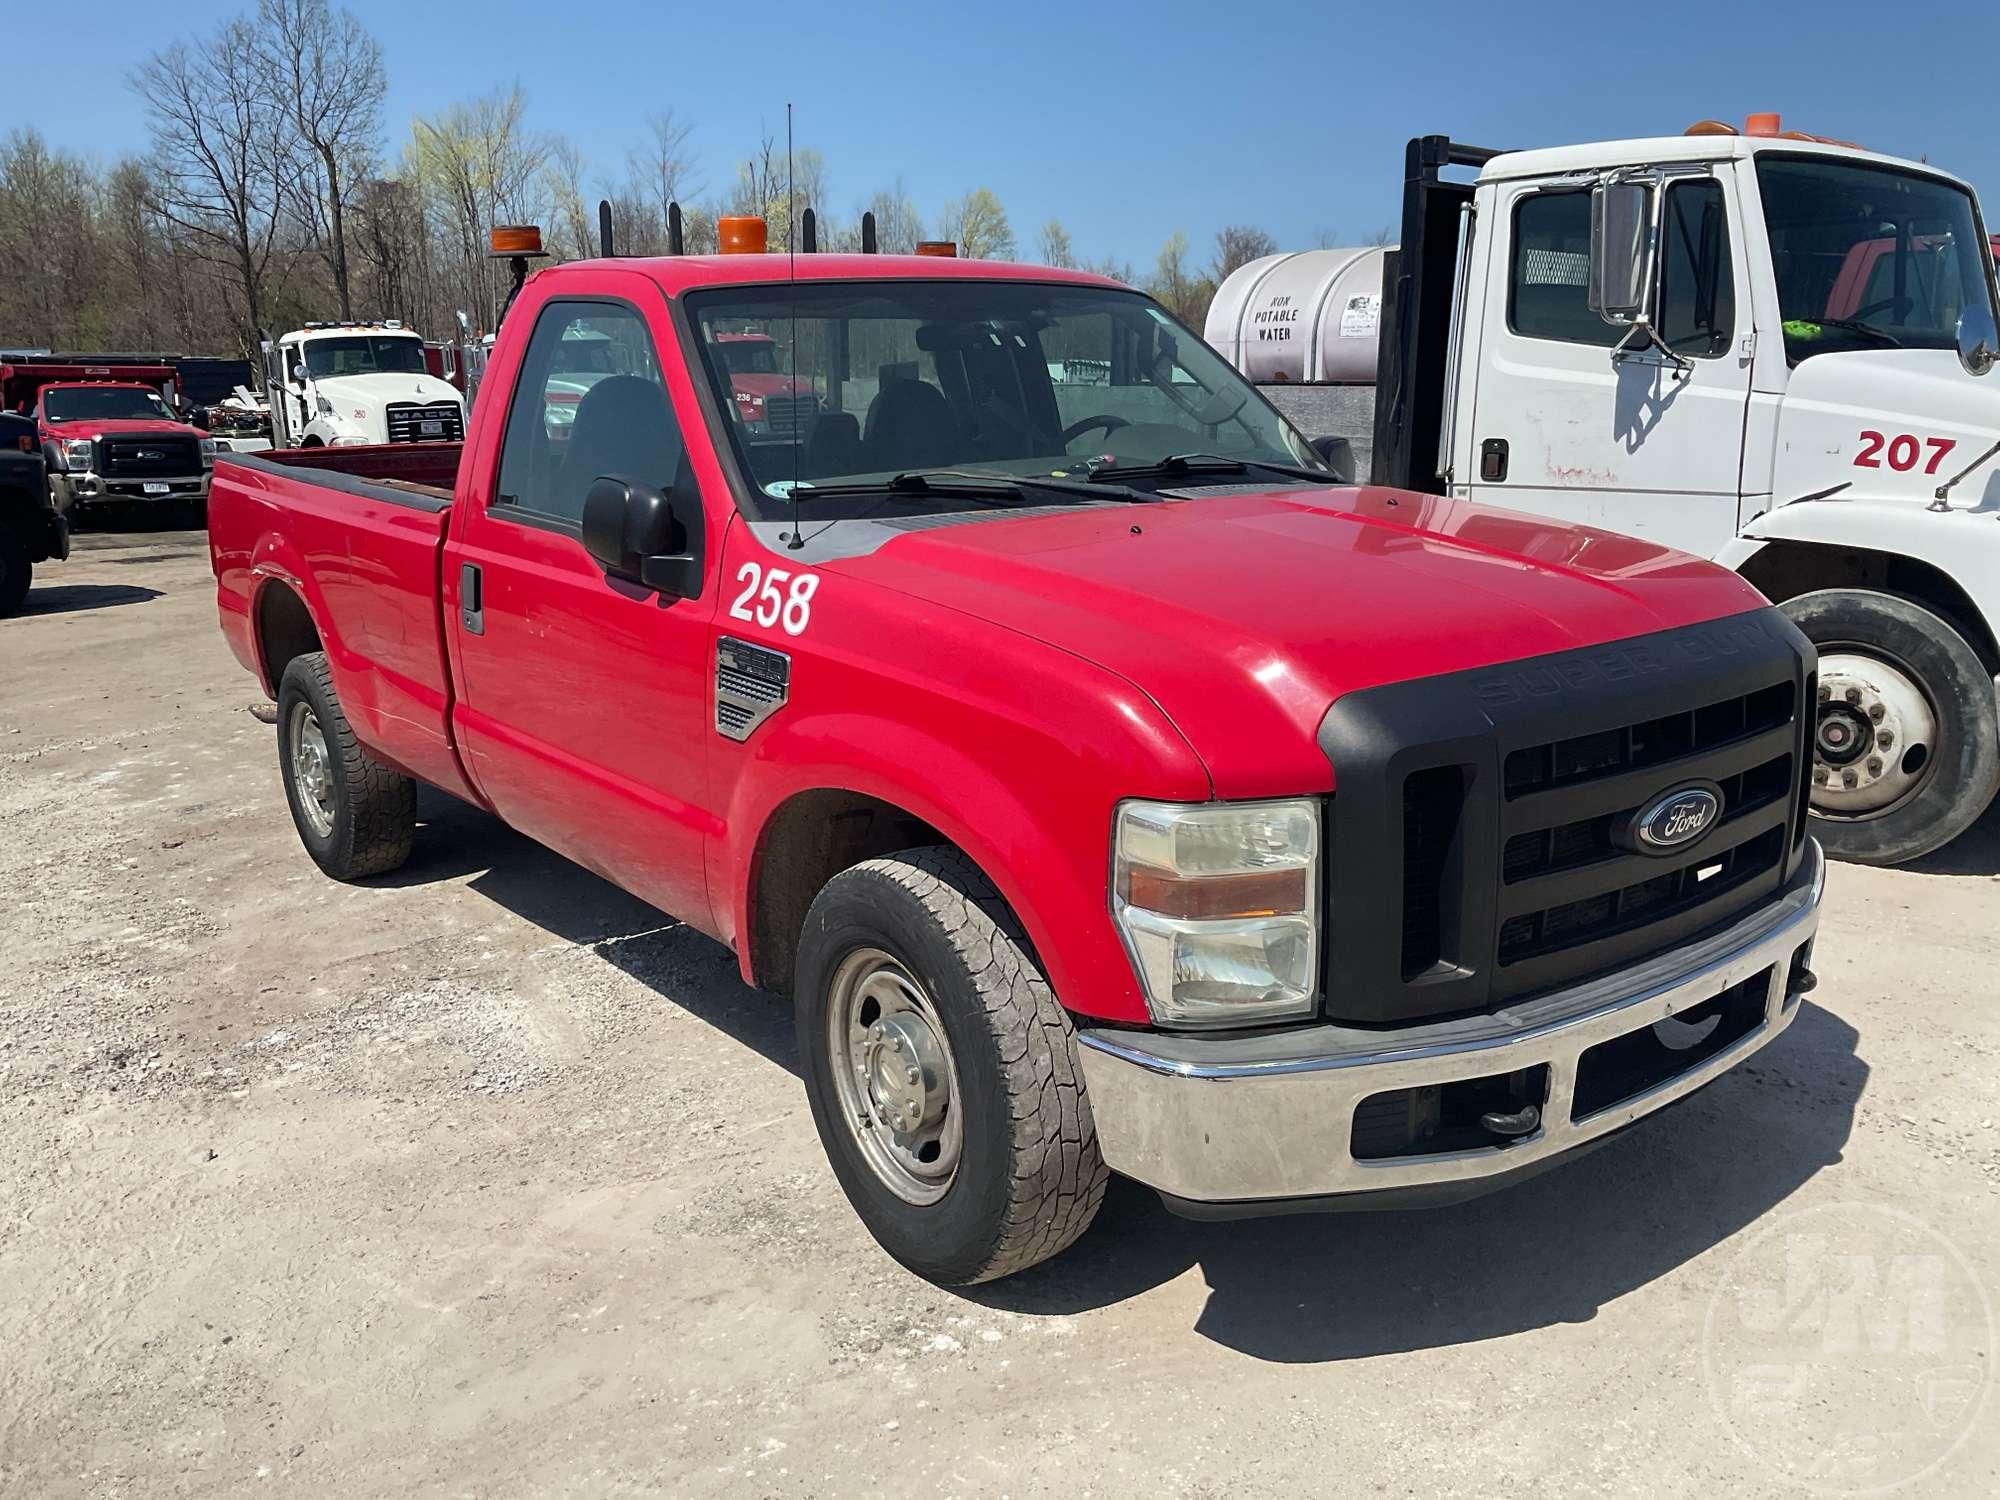 2008 FORD F-250 VIN: 1FTNF20528EE05741 F250 SUPER DUTY